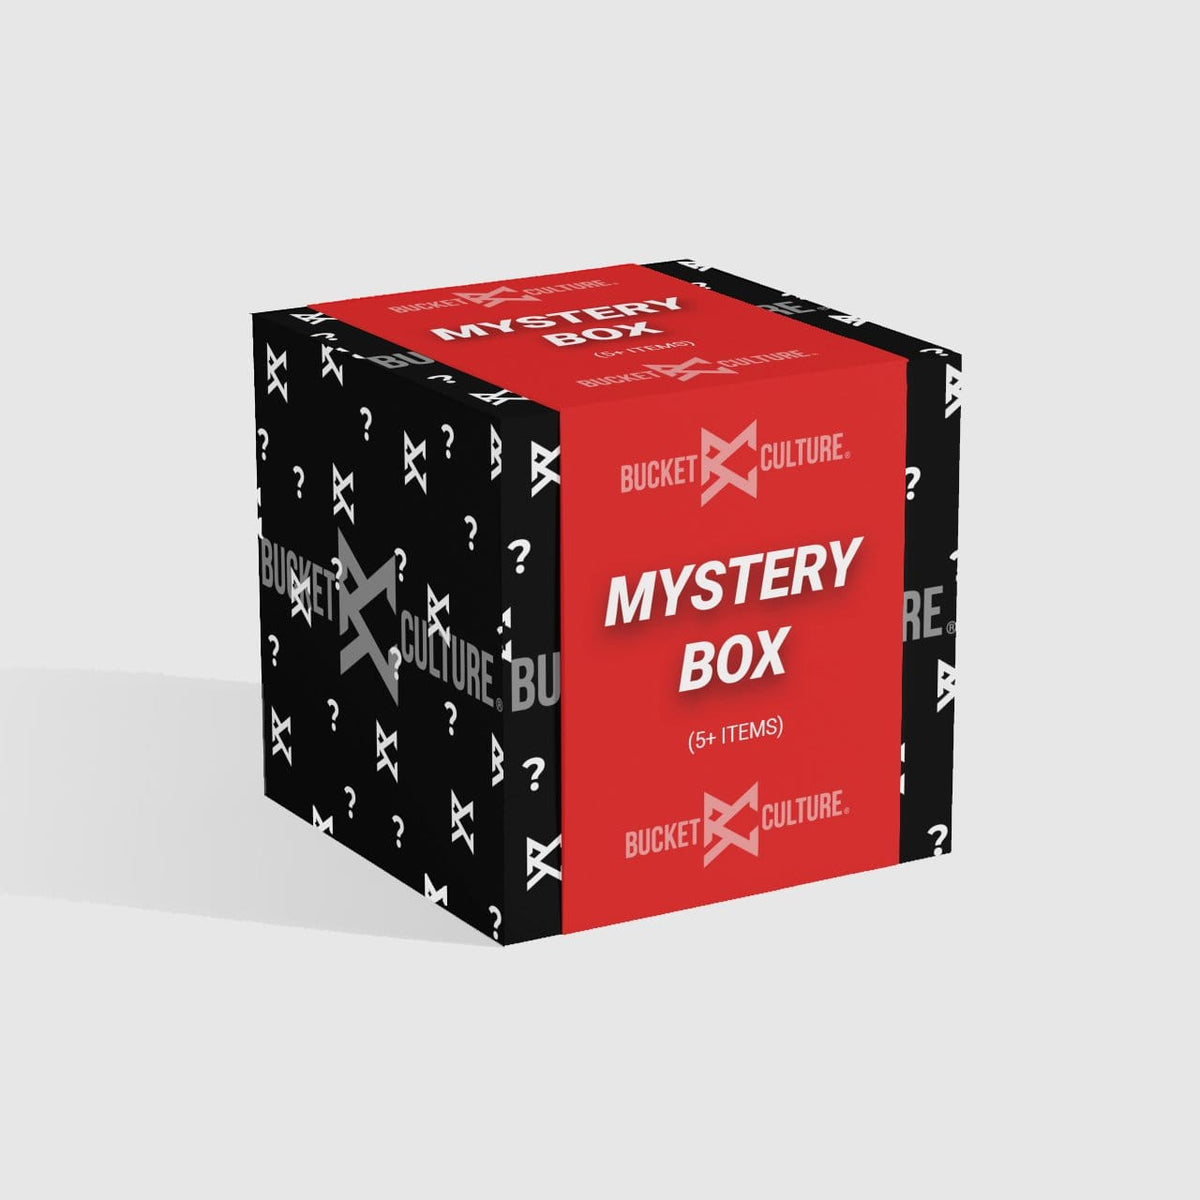 What is a Mystery Box? – Help Center